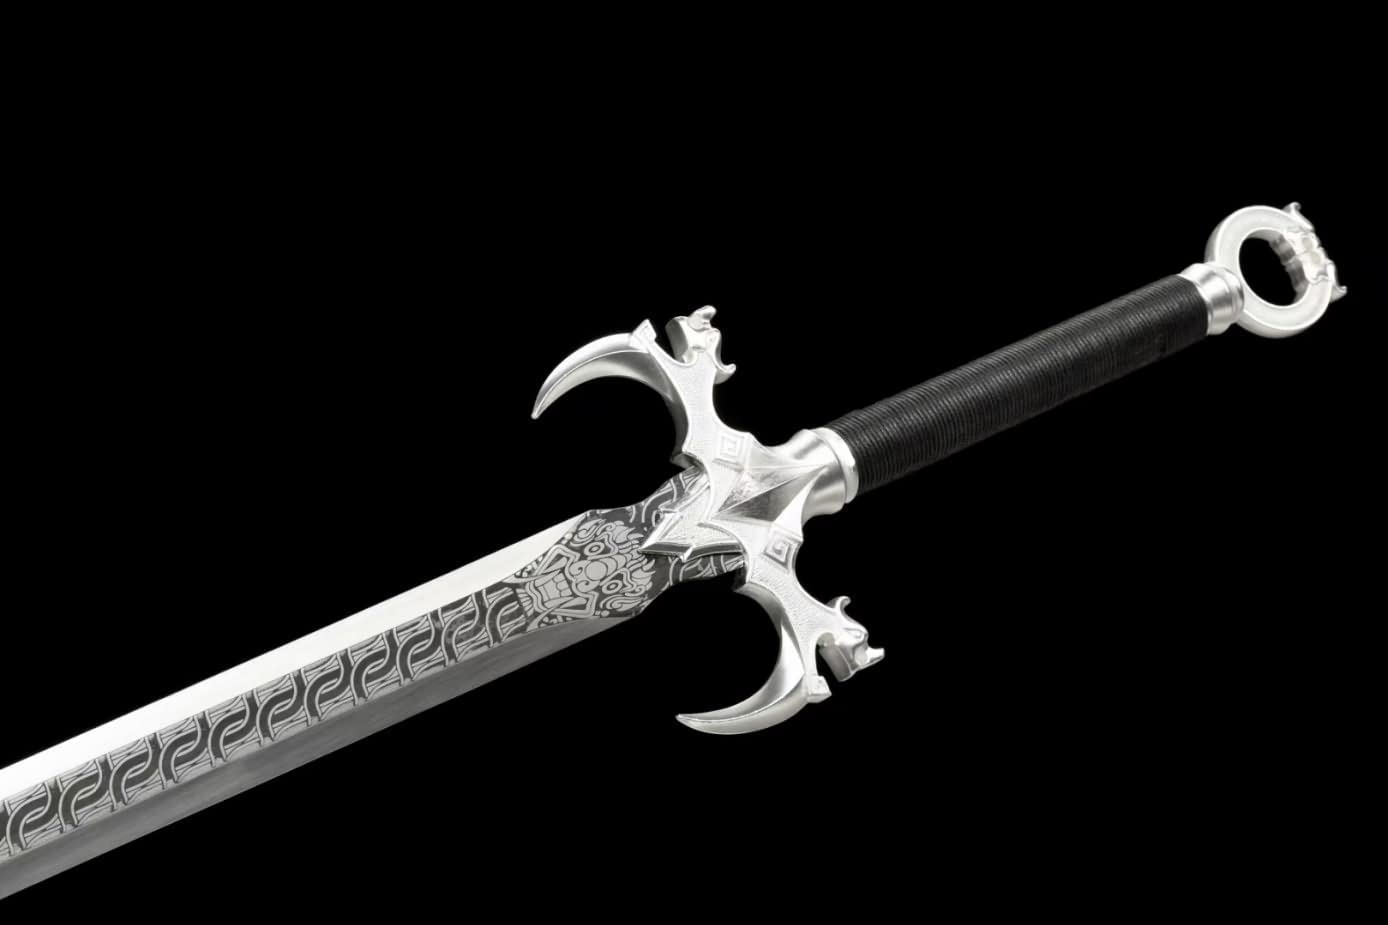 Knight Swords Forged high Carbon Steel Blades,Alloy Fittings,Fake Leather Scabbard,CHINESE SWORD